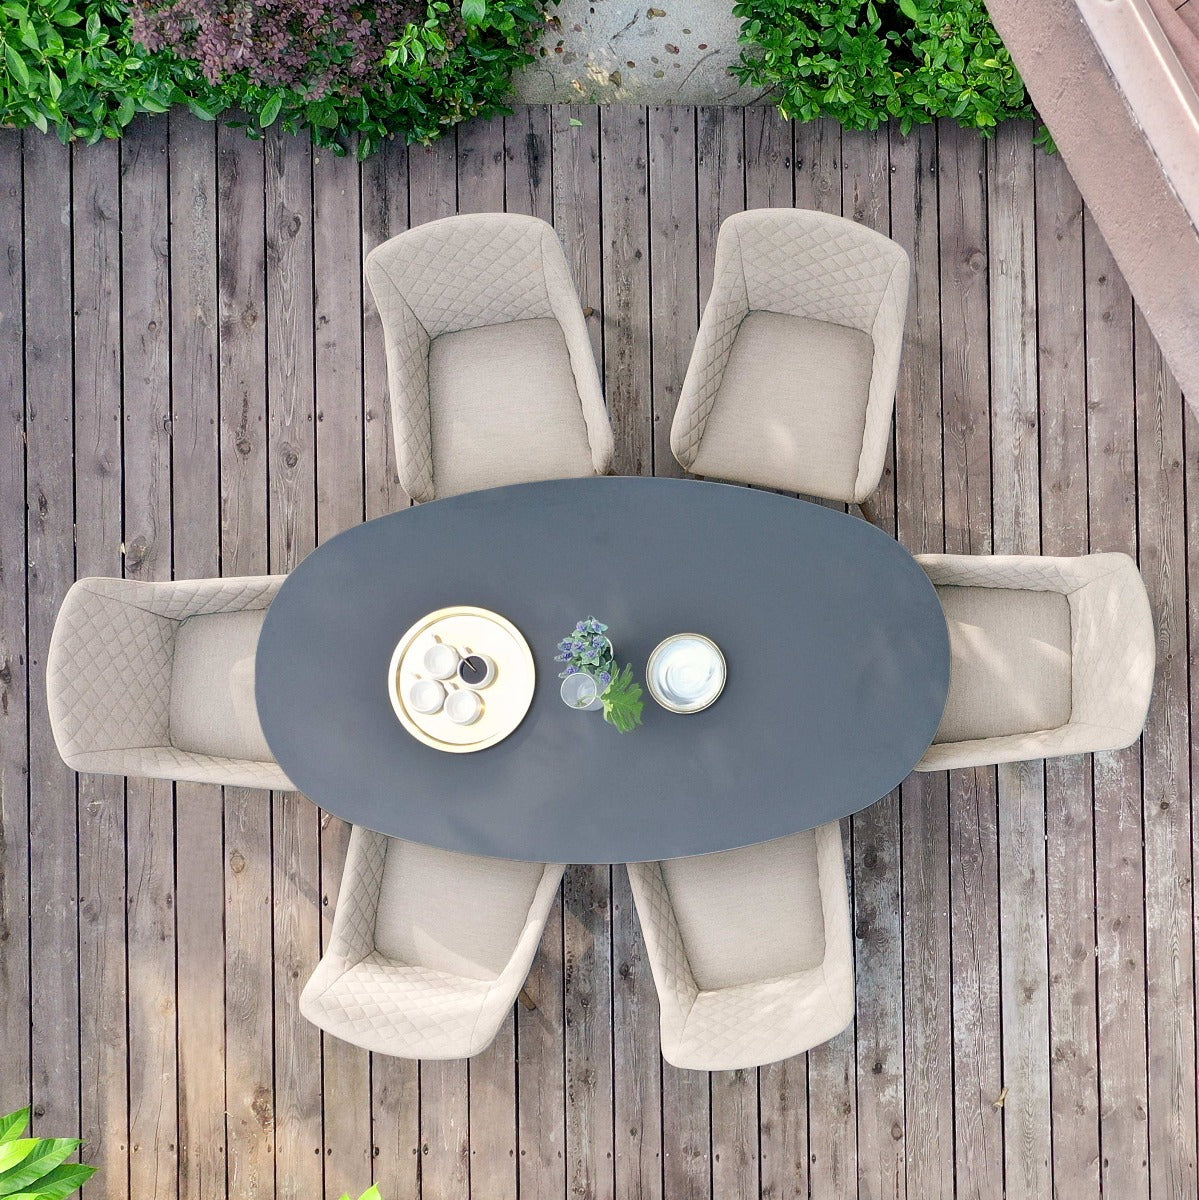 Maze - Outdoor Fabric Zest 6 Seat Oval Dining Set - Taupe